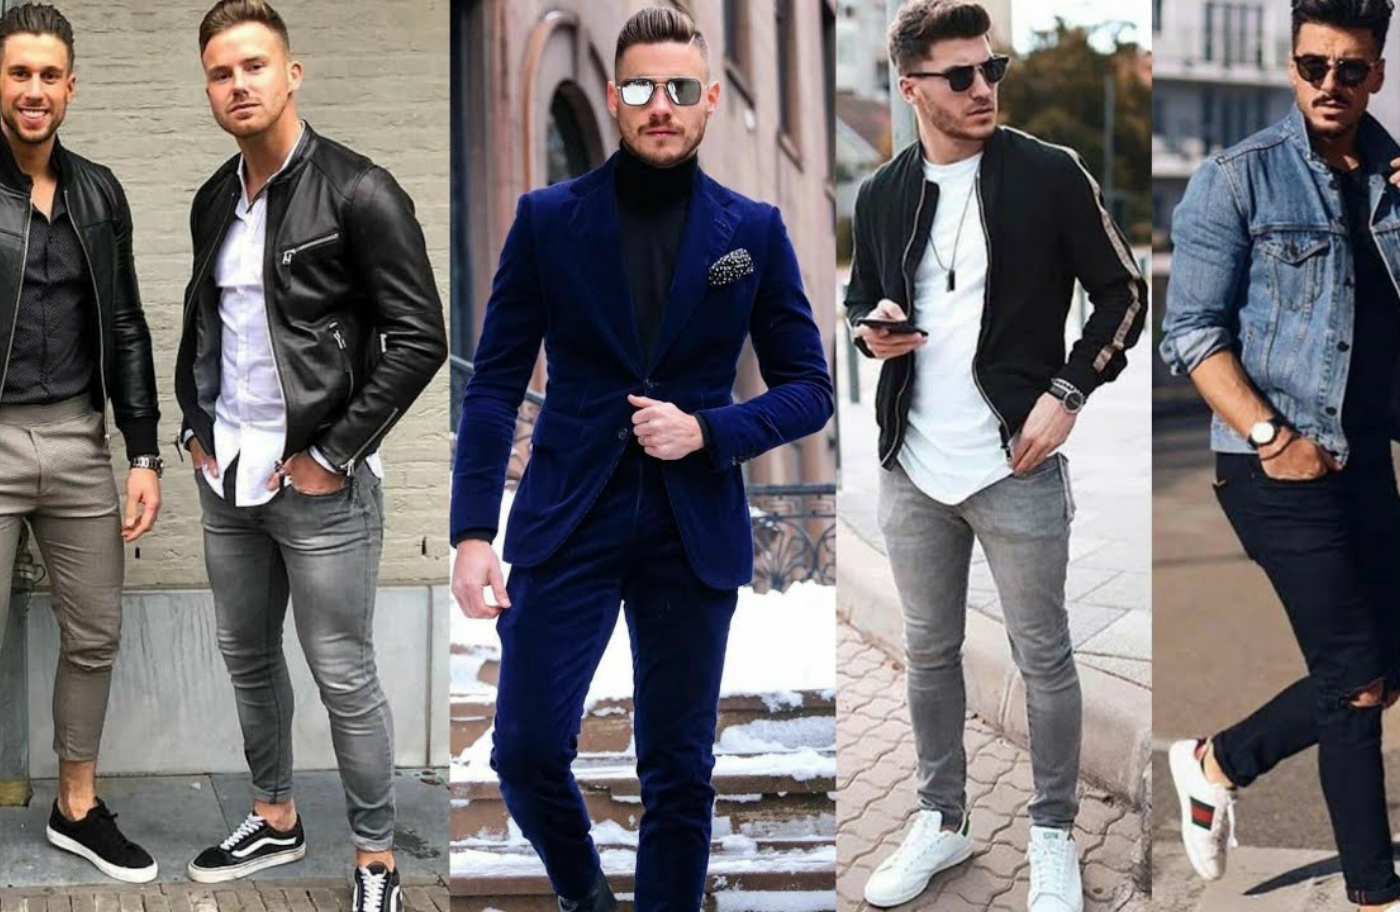 Party Outfits For Guys - Rock The Party in Style